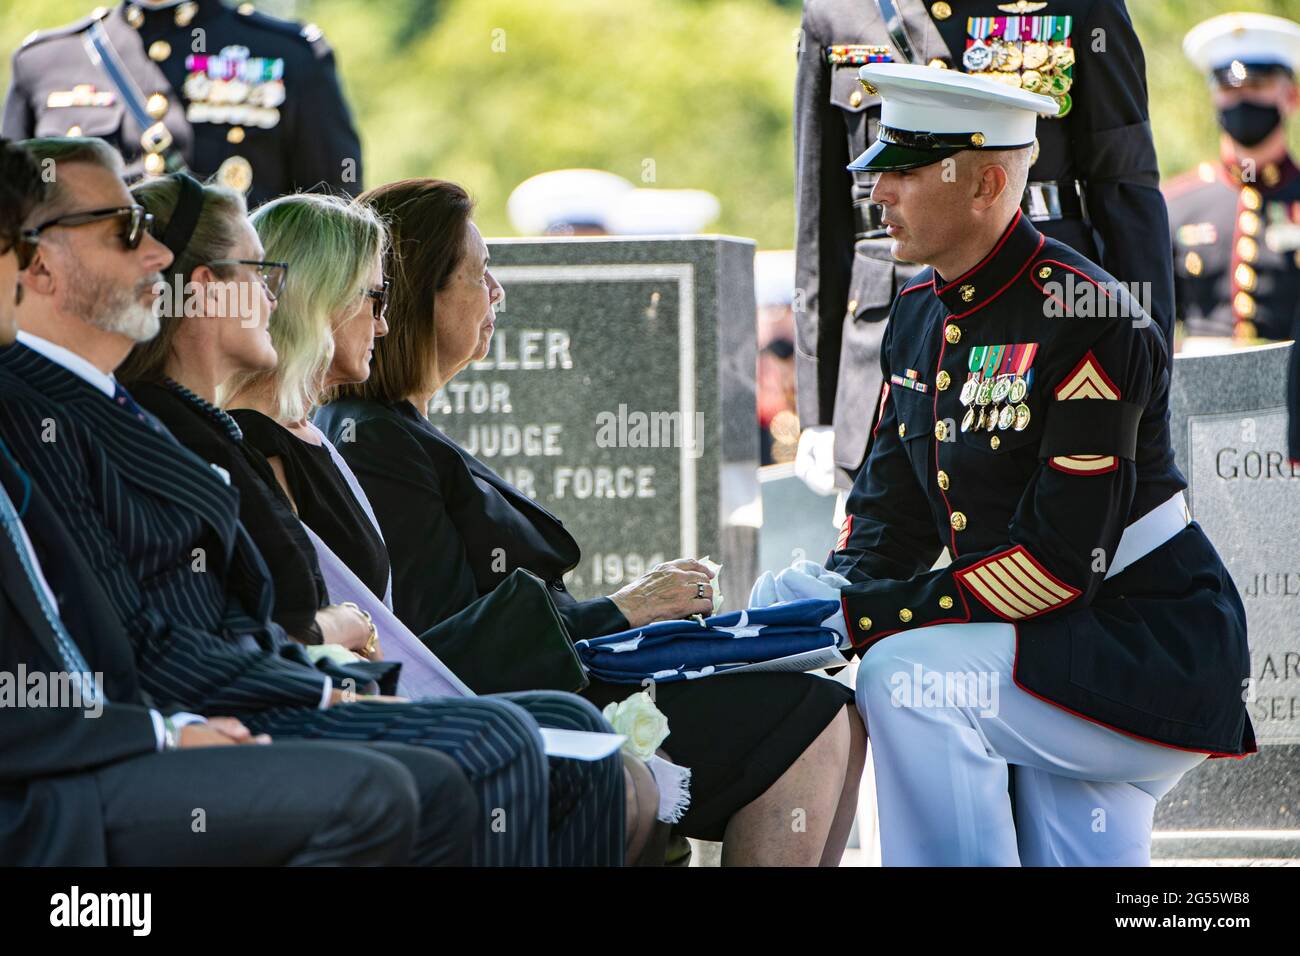 A U.S. Marine gives condolences to Jeanne Warner, wife of former U.S. Senator and Marine Corps 1st Lt. John Warner during his funeral in Arlington National Cemetery June 23, 2021 in Arlington, Virginia. Warner, a Senator for Virginia for 30-years and Secretary of the Navy died May 25th. Stock Photo